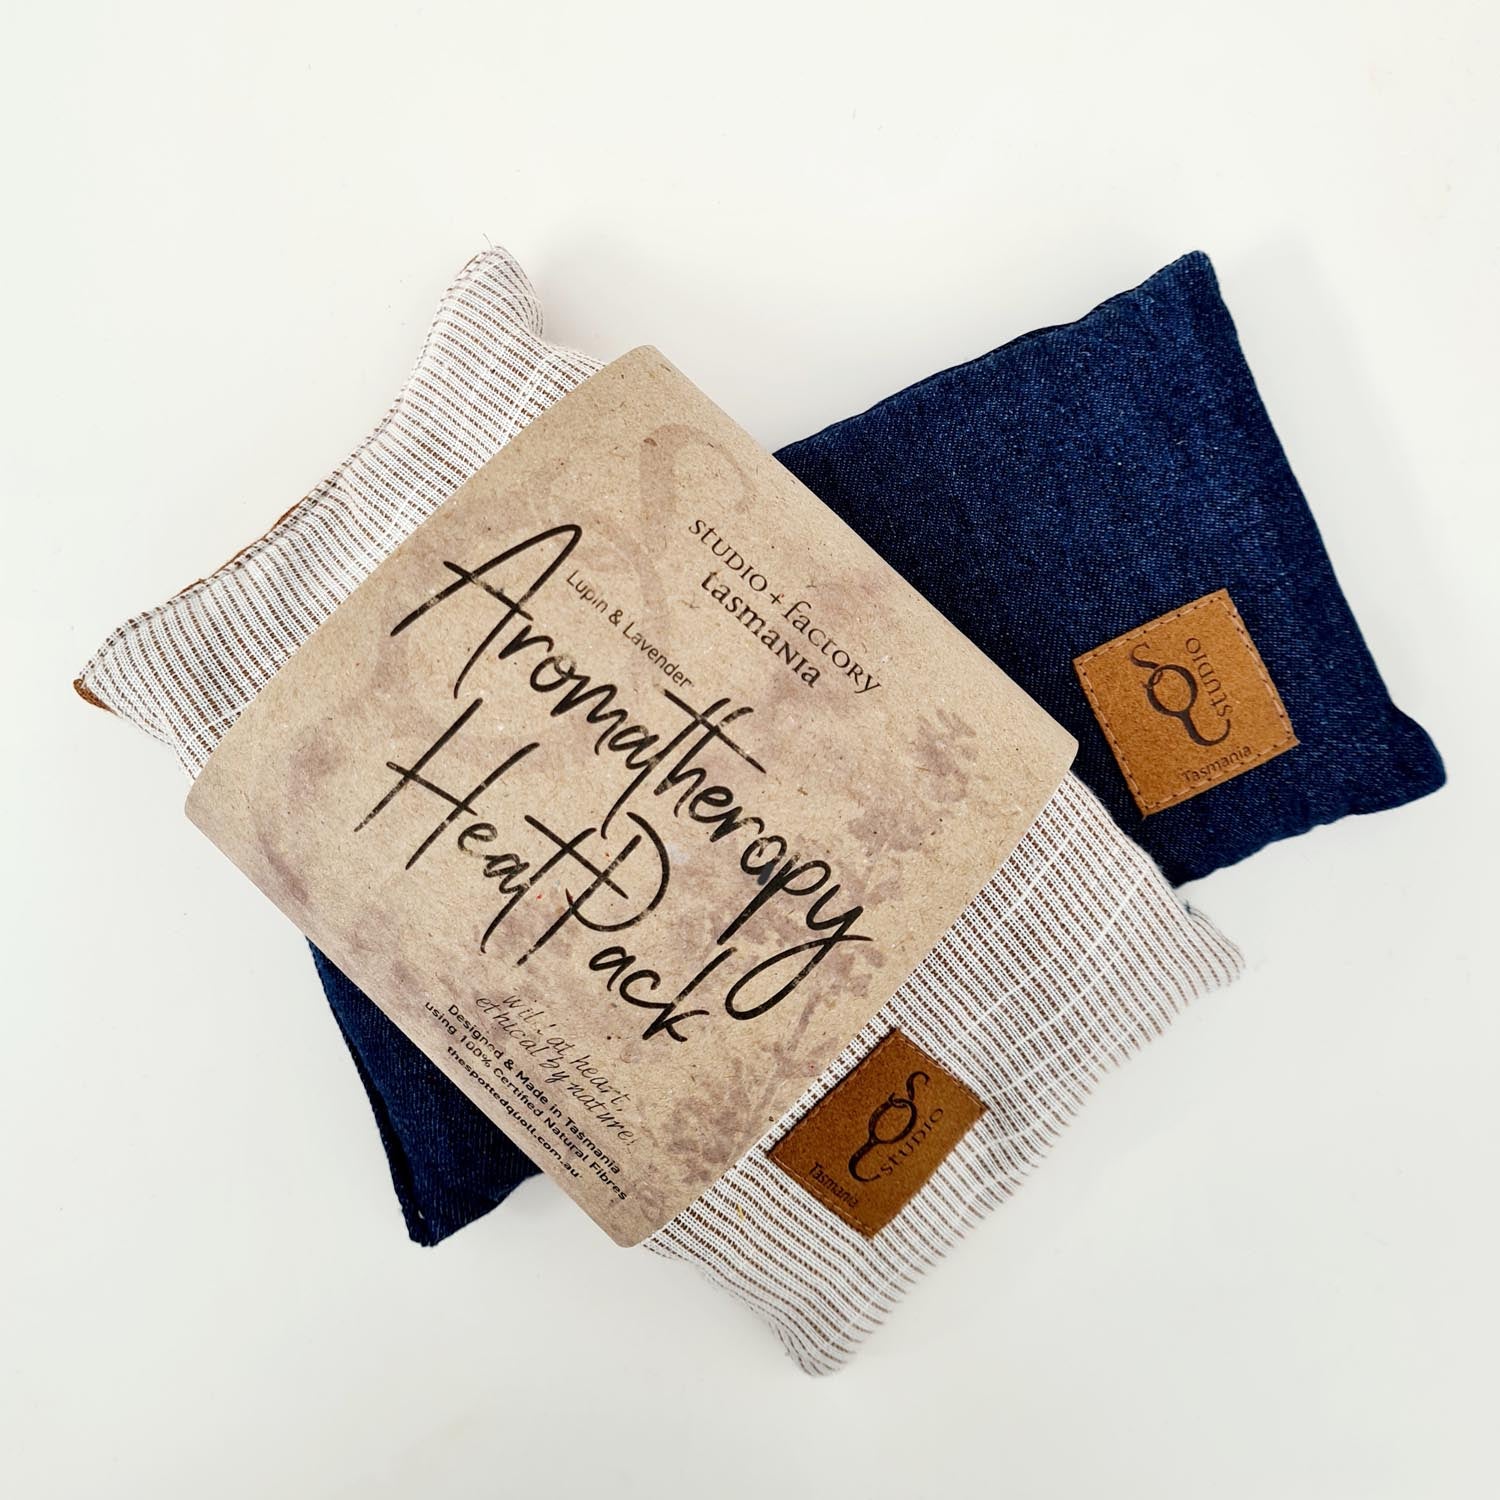 Aromatherapy Heat/cold pack - Lupin & Lavender Heating Pads The Spotted Quoll Double Trouble Organic Hessian Fleck & Denim 